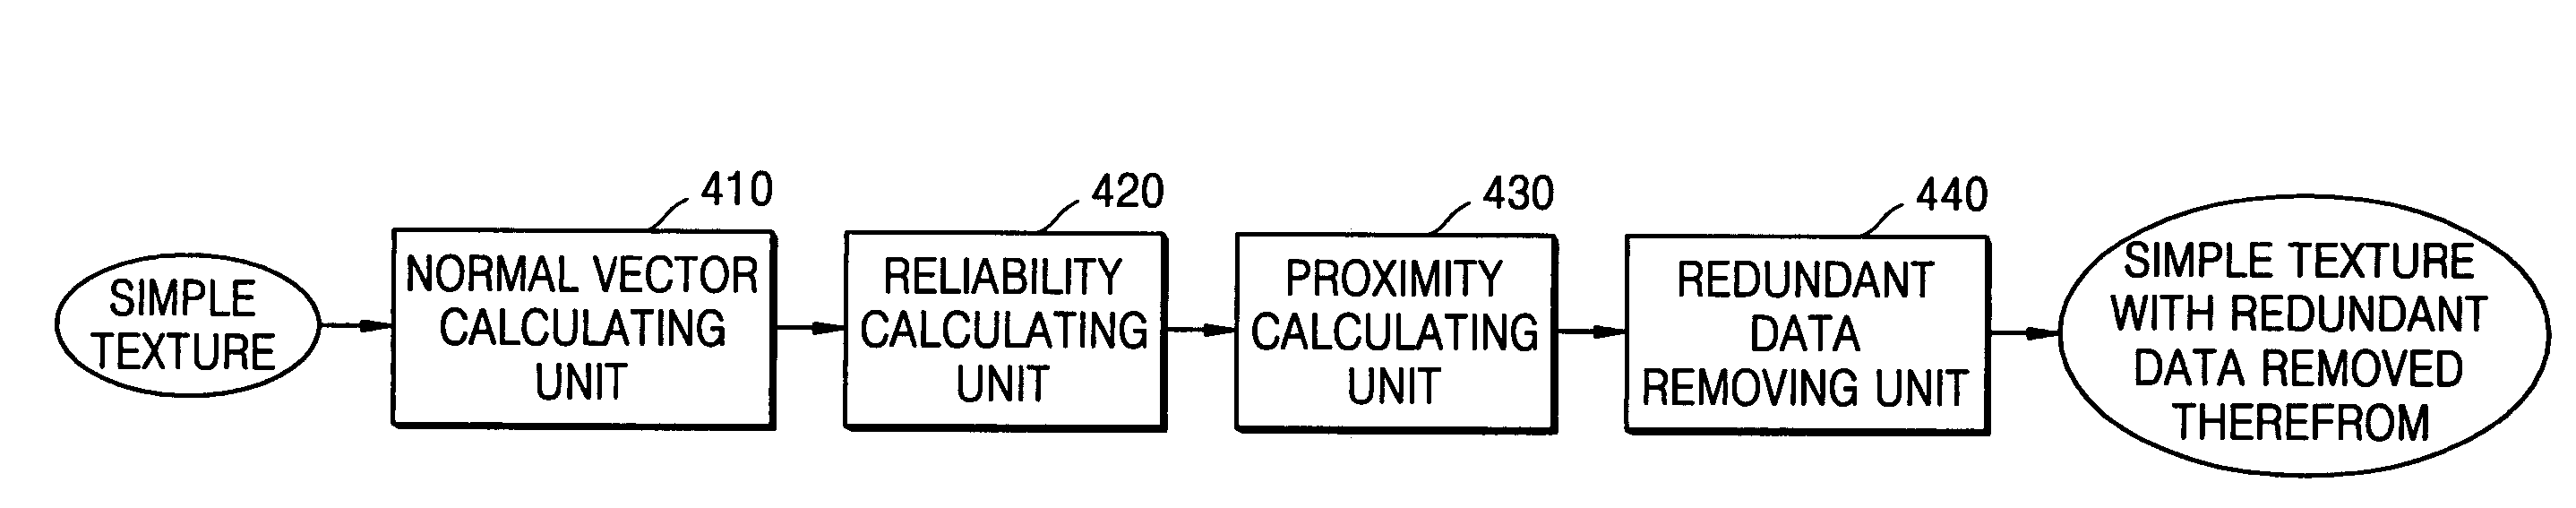 Image-based rendering and editing method and apparatus